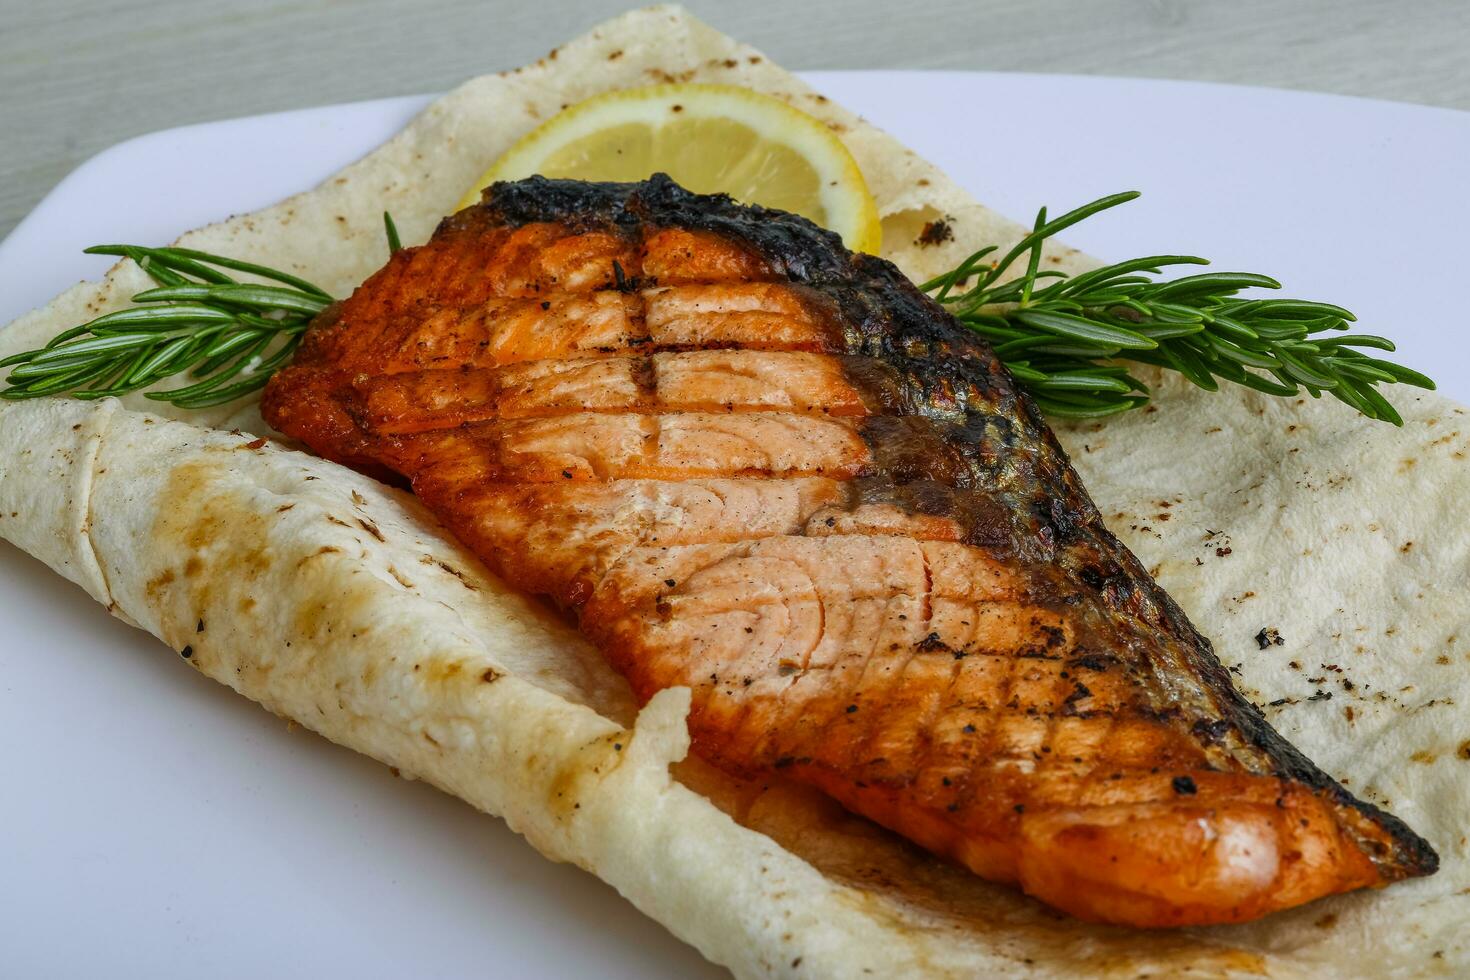 Grilled salmon on the plate and wooden background photo